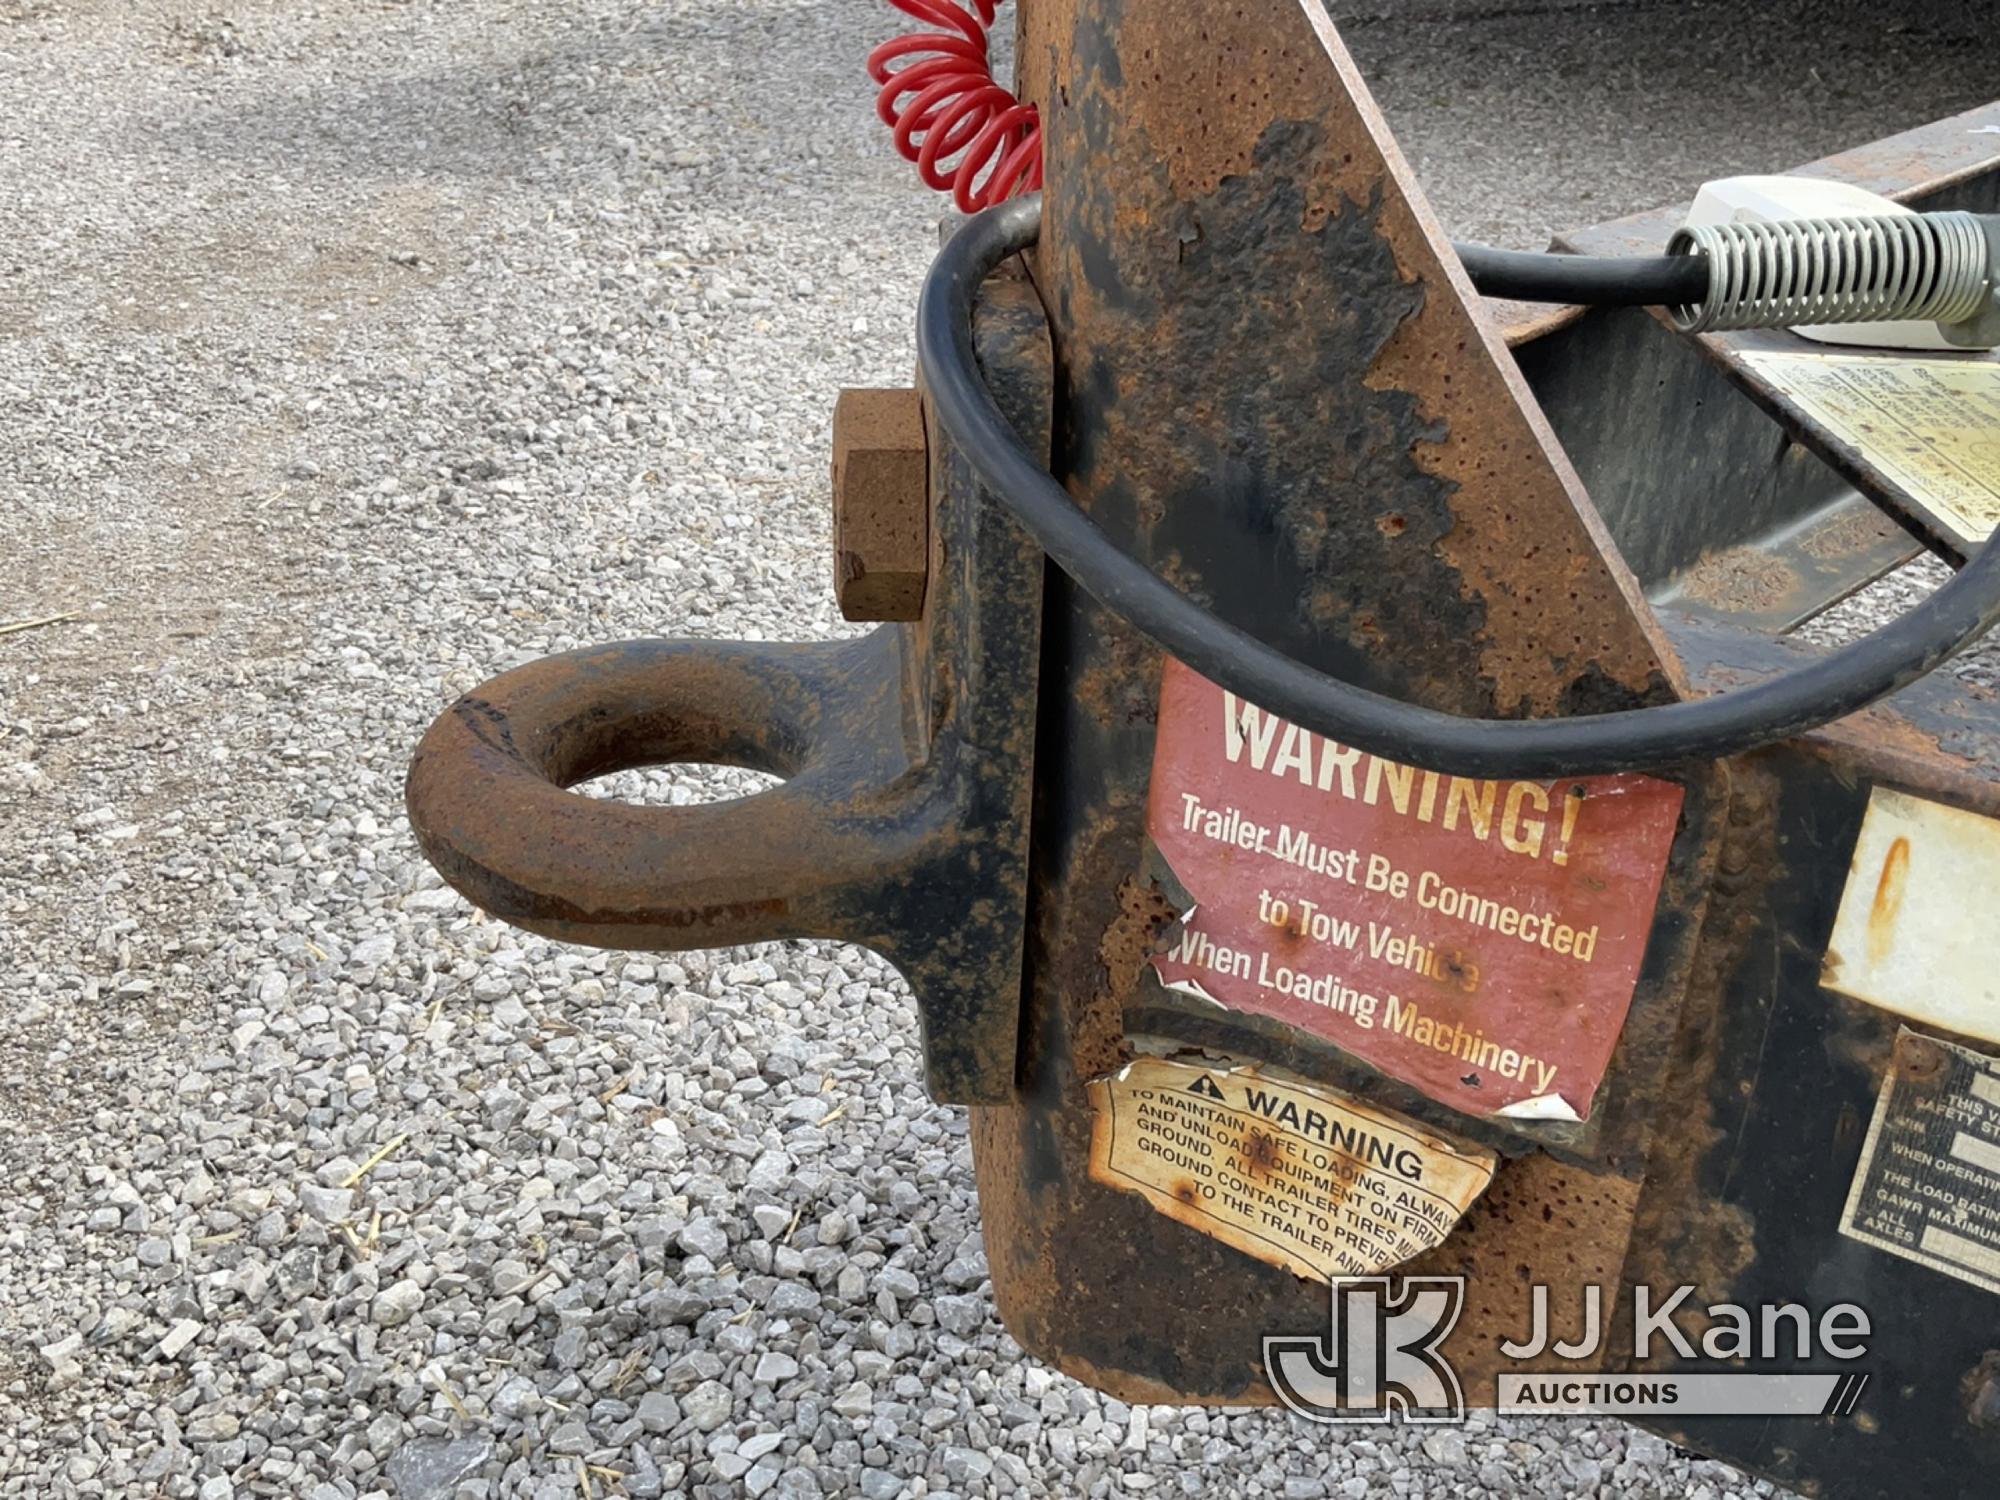 (Verona, KY) 2011 Eager Beaver SK6 T/A Tagalong Equipment Trailer Missing Ramp Chain, Rust Damage) (